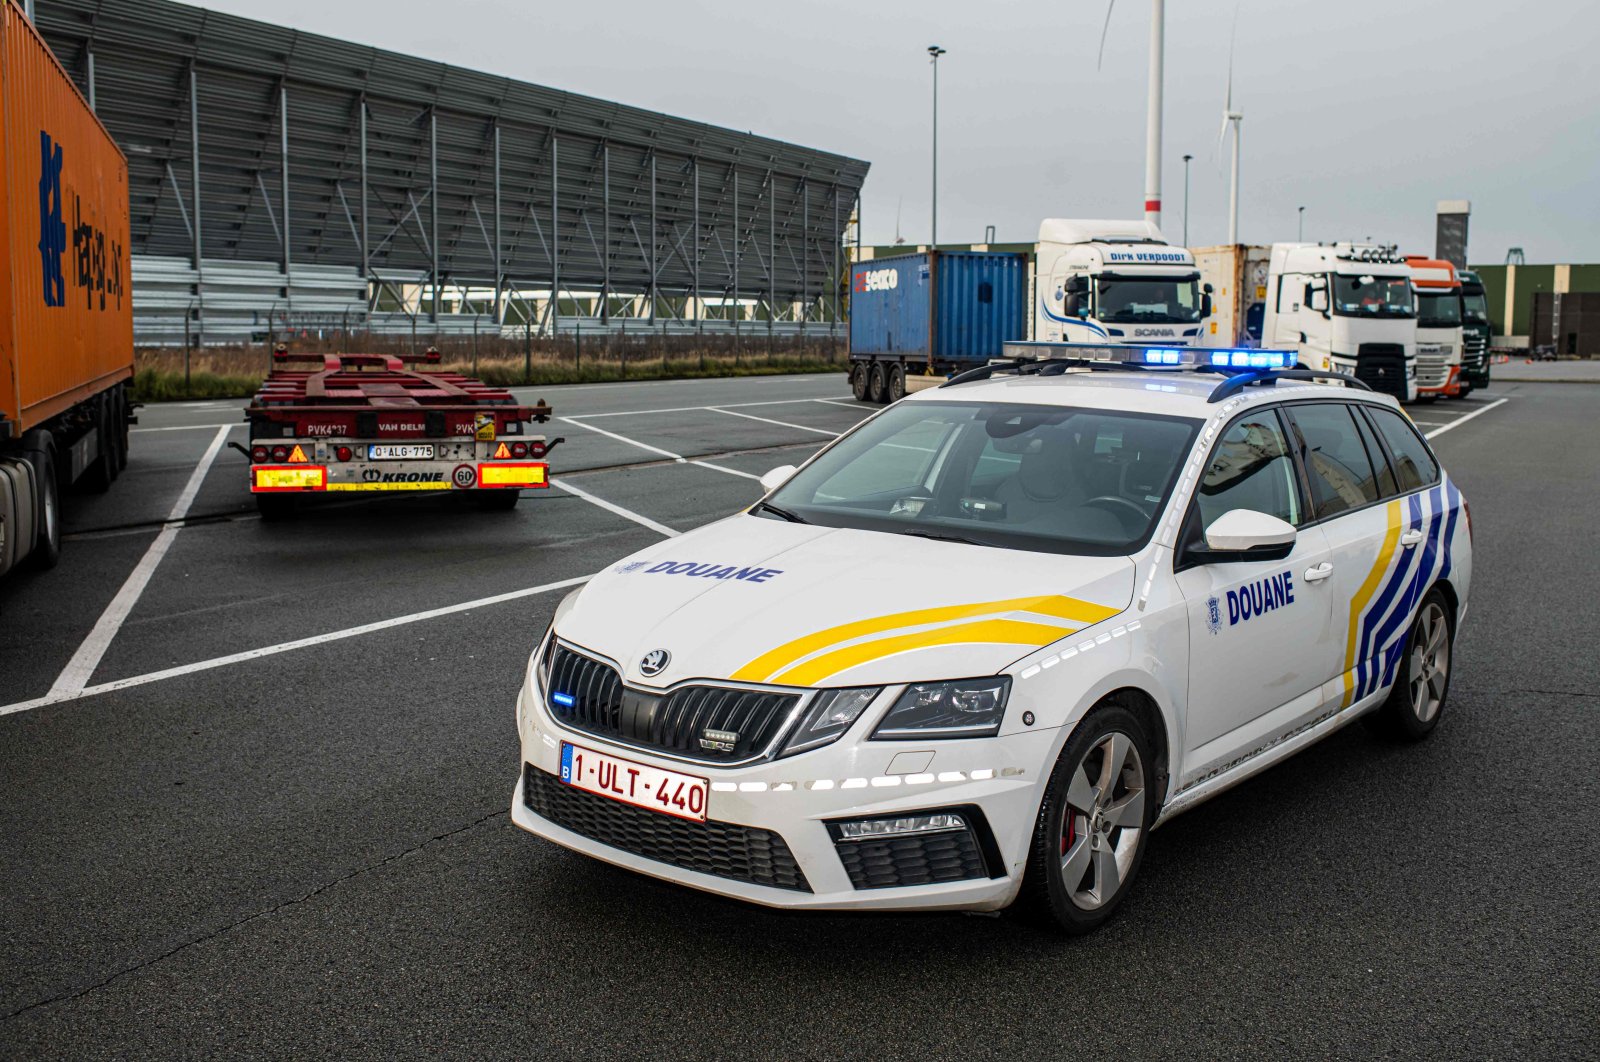 A Belgian customs car during a joint press briefing of the Belgian and Dutch customs authorities on the cocaine intercepted in the Antwerp and Rotterdam harbors in 2022, in Beveren, Belgium, Jan. 10, 2023. (AFP Photo)